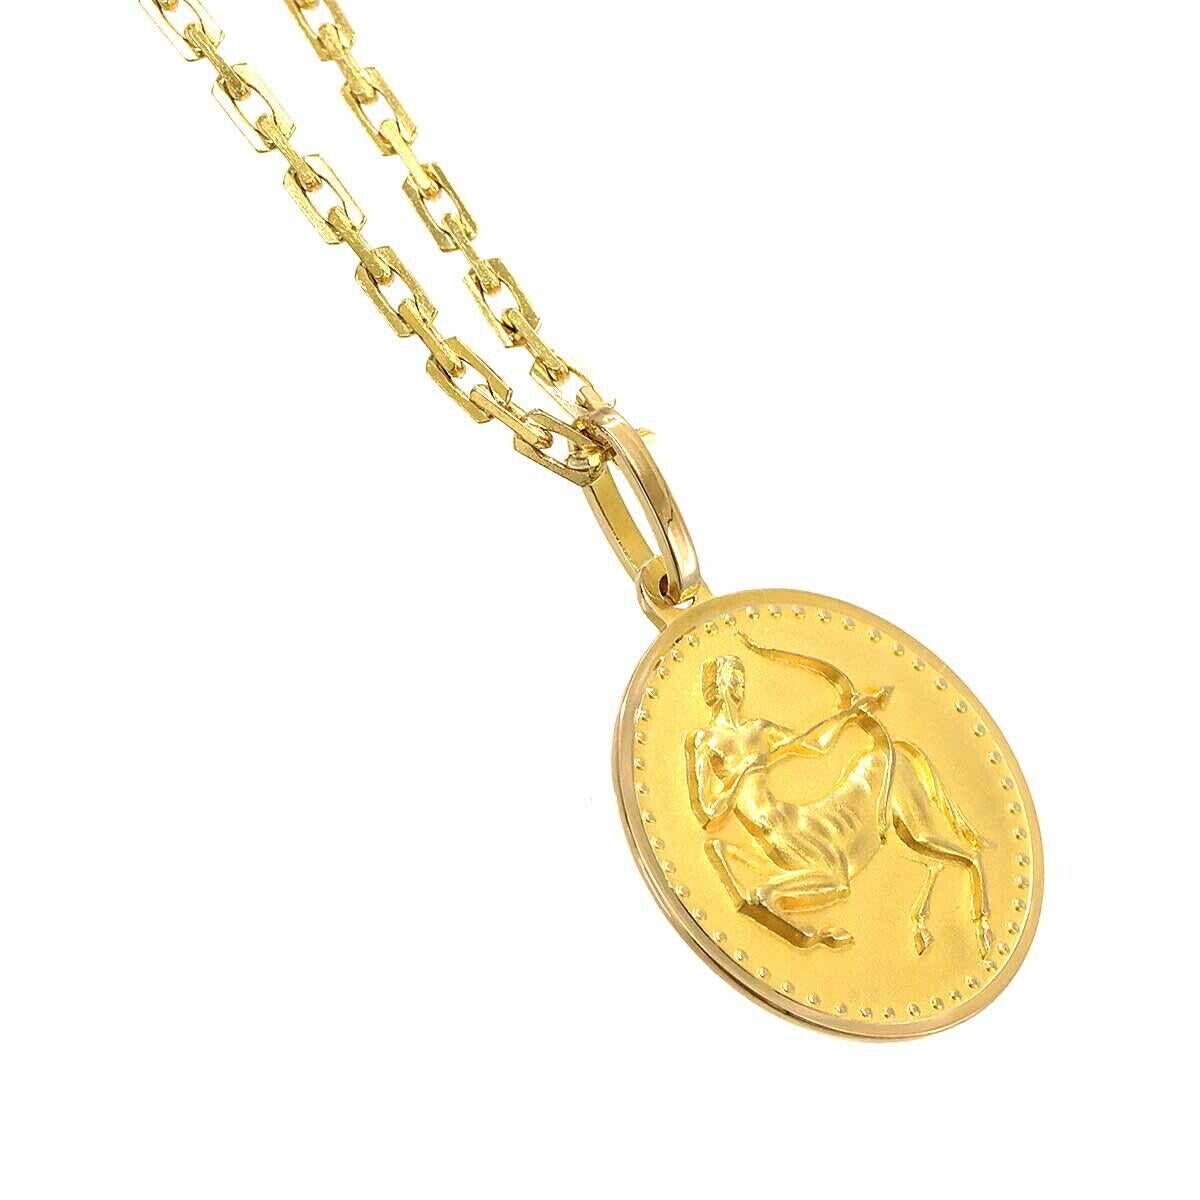 Unoaerre 18k Yellow Gold Sagittarius Zodiac Necklace

Here is your chance to purchase a beautiful and highly collectible designer necklace.  

UNOAERRE Chain Necklace 18K Yellow Gold 750 
Brand Name	UNOAERRE
Style	Necklace
Material	750 Yellow